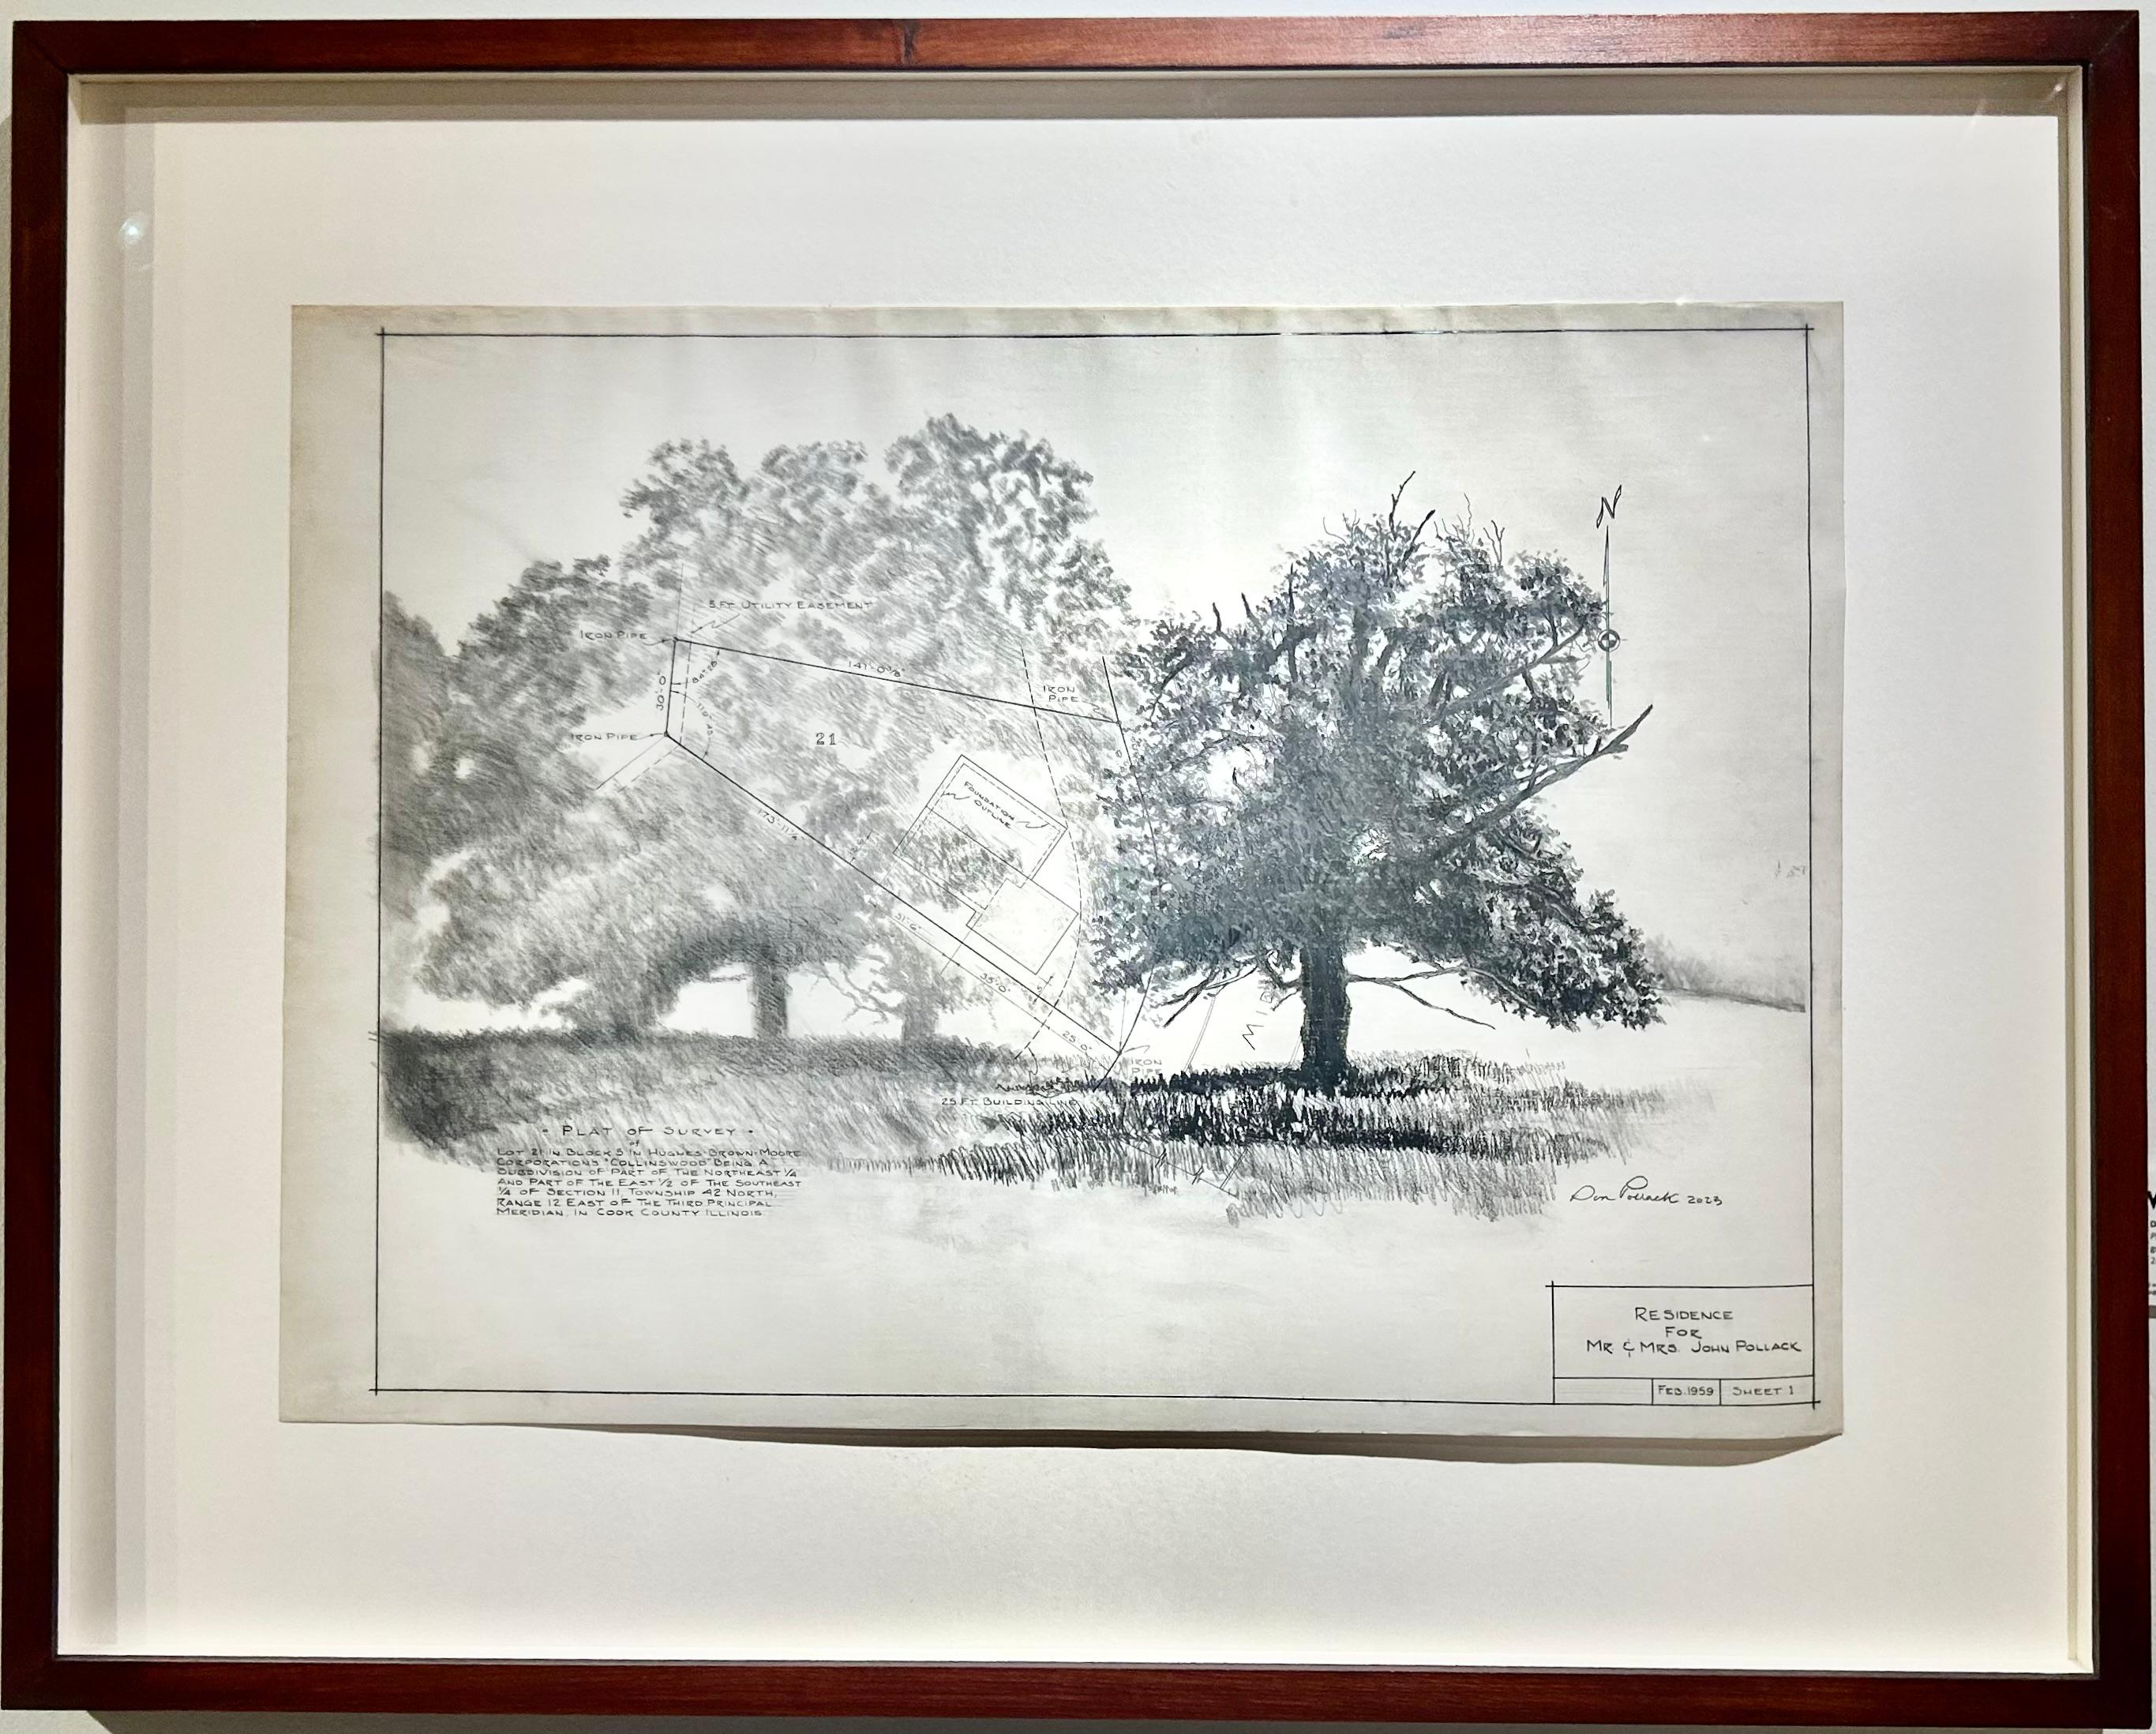 Plat Survey - Trees in Graphite on Antique Architectural Drawings  - Art by Don Pollack